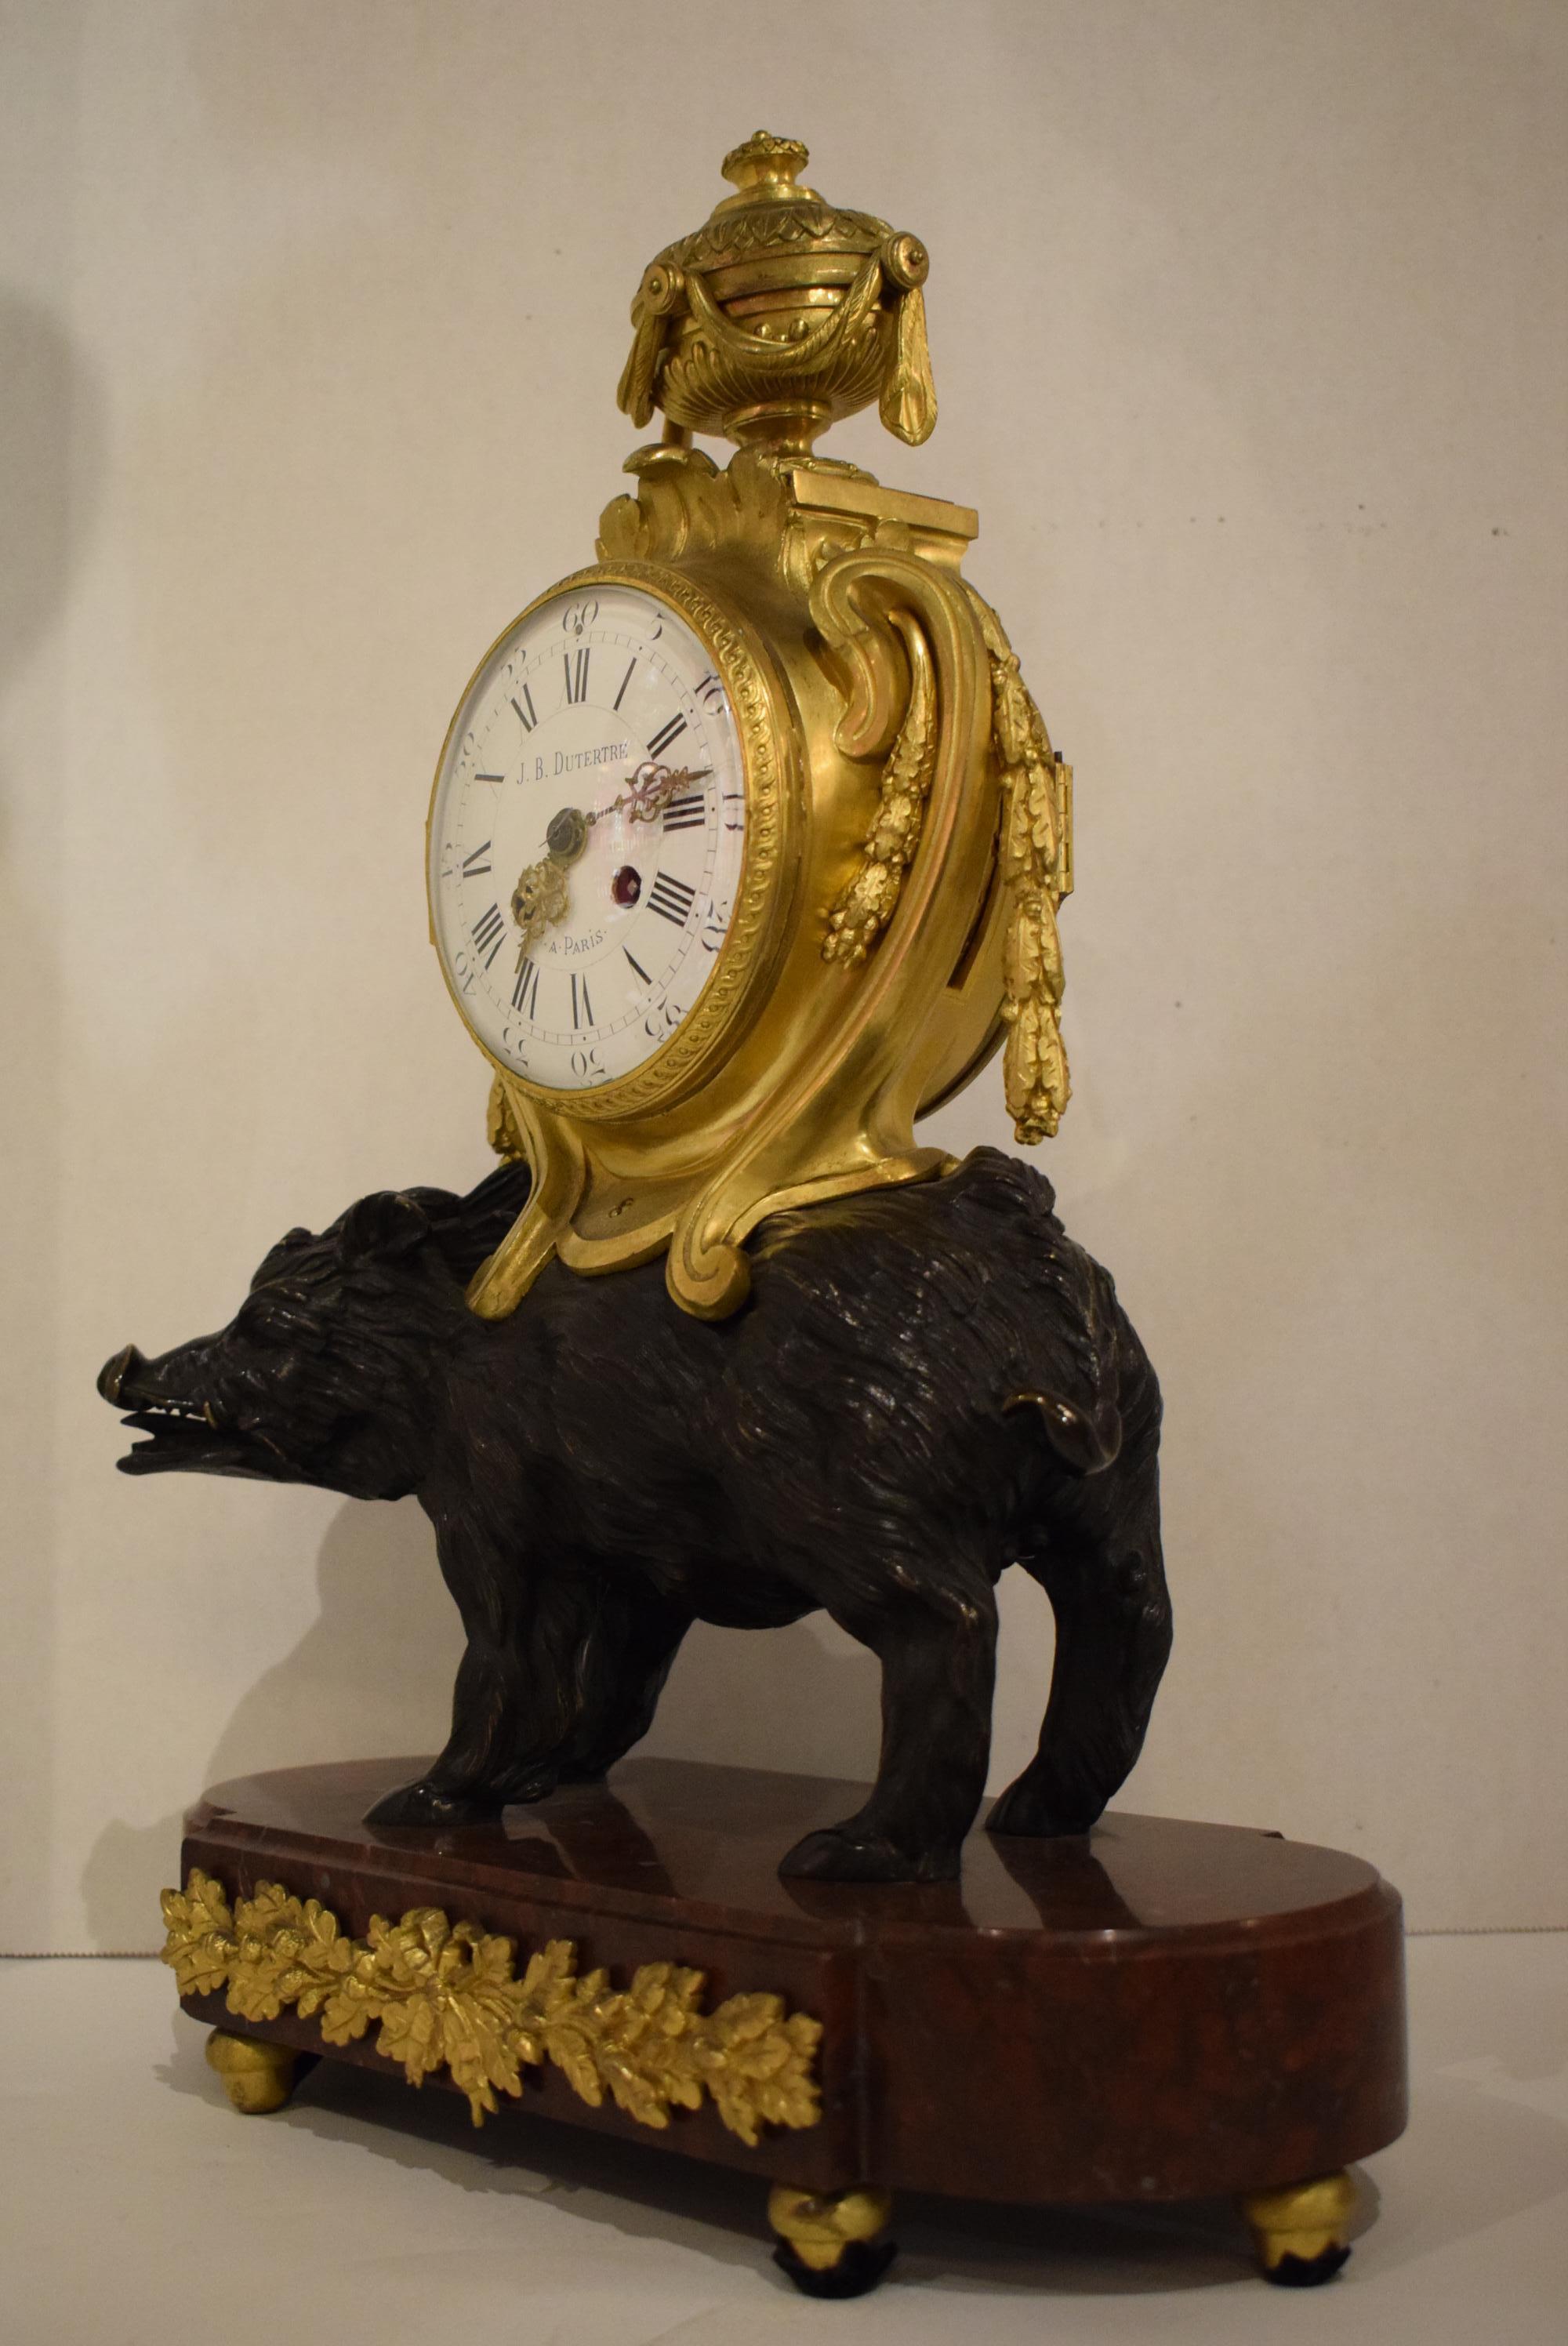 A superb clock in the manner of Le Faucher (clocksmith for Louis XVI) signed J. B. Dutertre. Paris, France, circa 1880.
Dimensions: Height 19